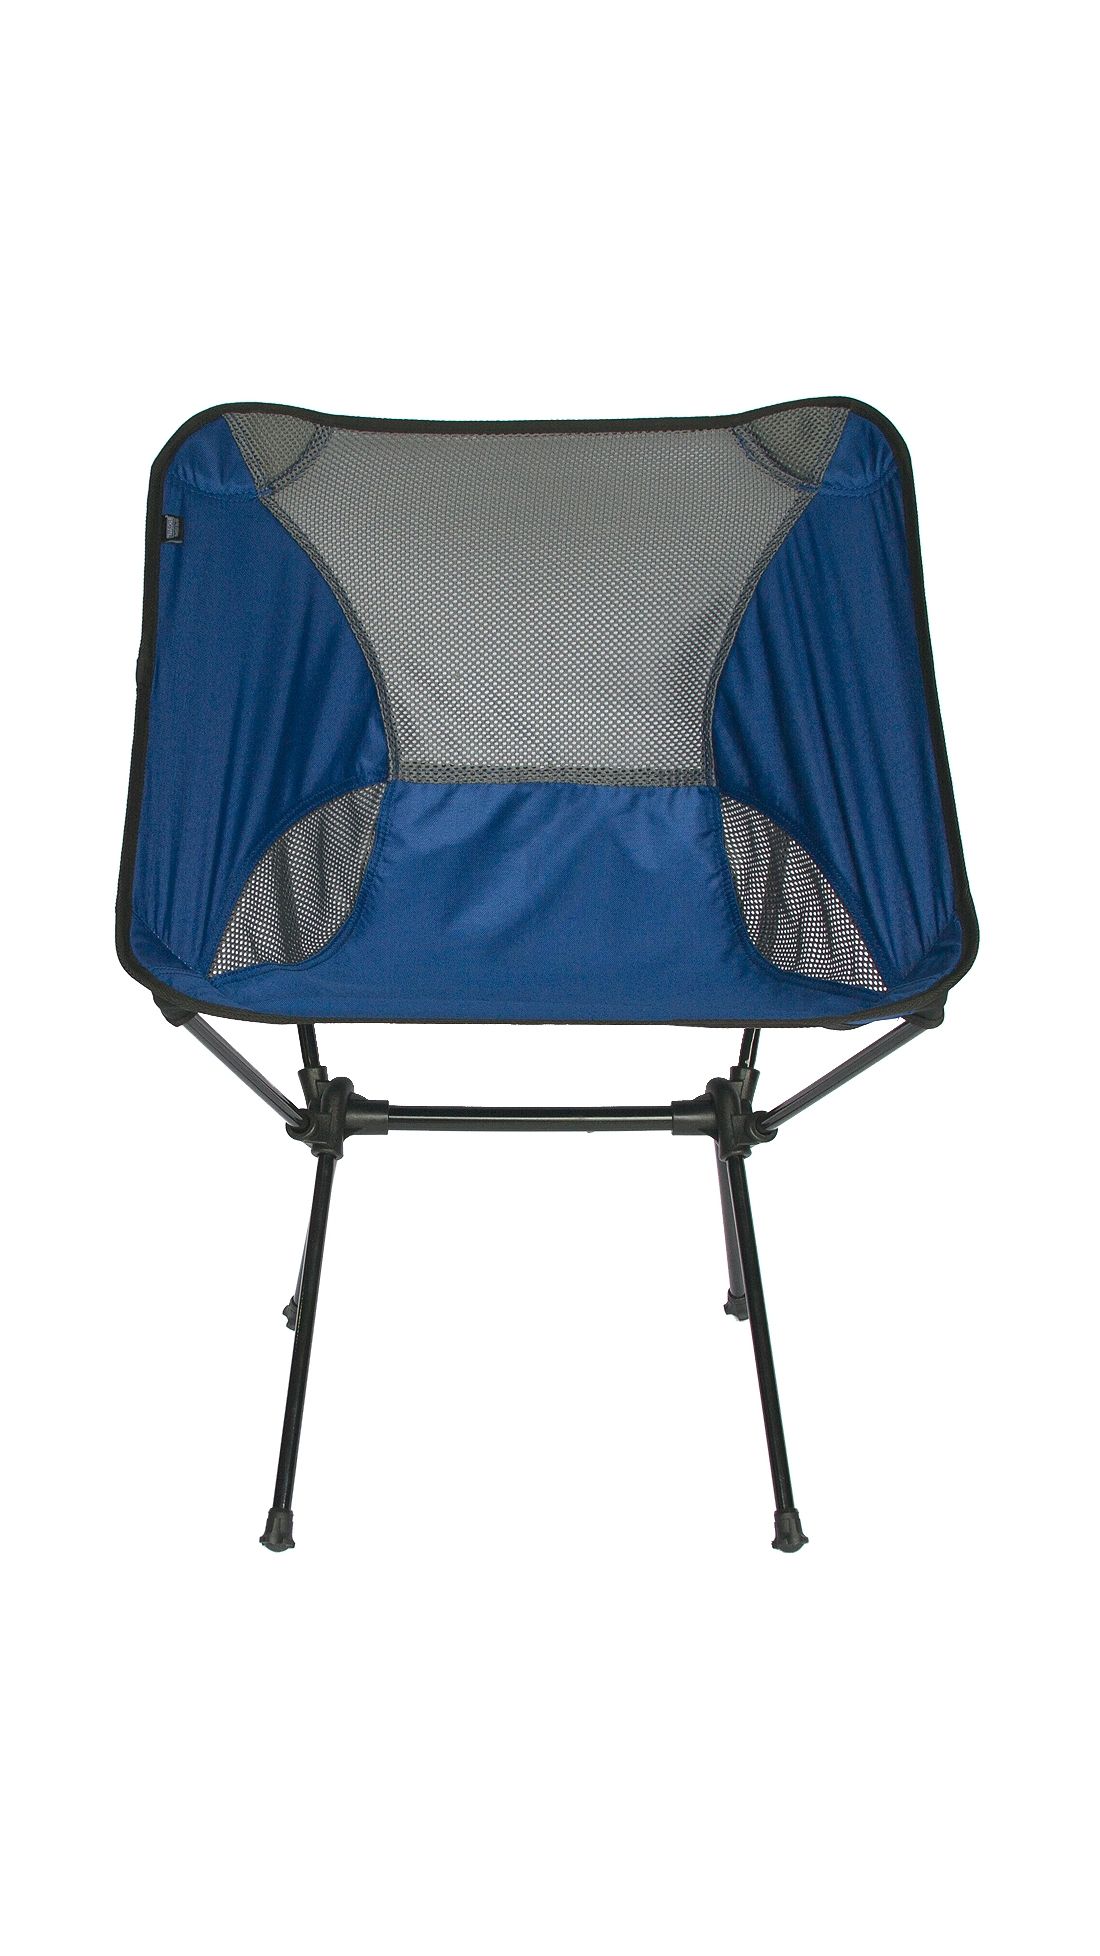 Travel Chair Joey Chair in Aluminum Clearance | 5 Star Rating Free